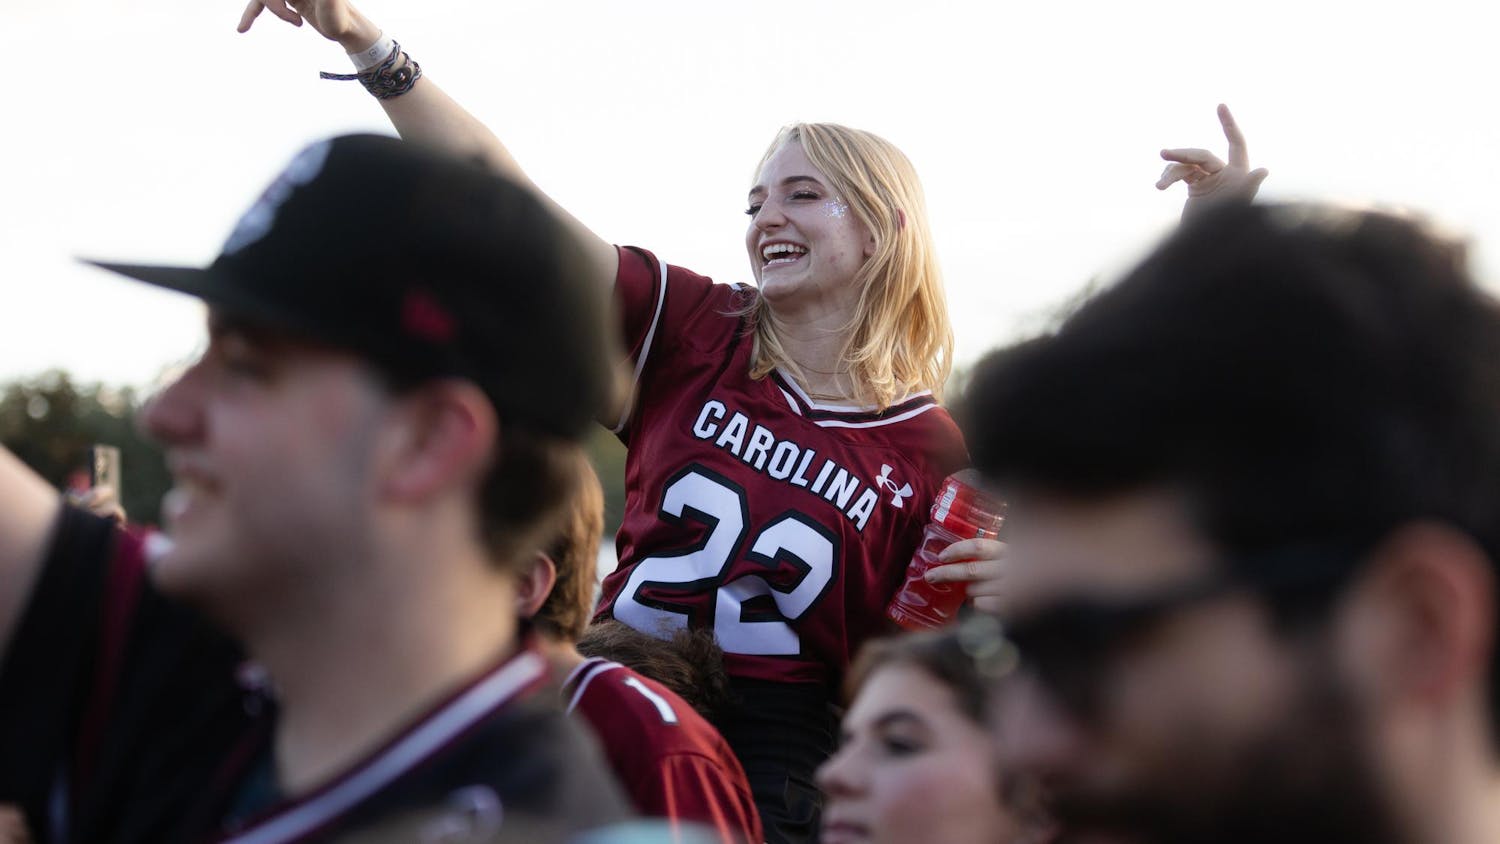 A Gamecock fan moves her arms to the music while at a pre-game Darude concert in Gamecock Park. The Gamecocks went on to defeat the Wildcats 17-14.